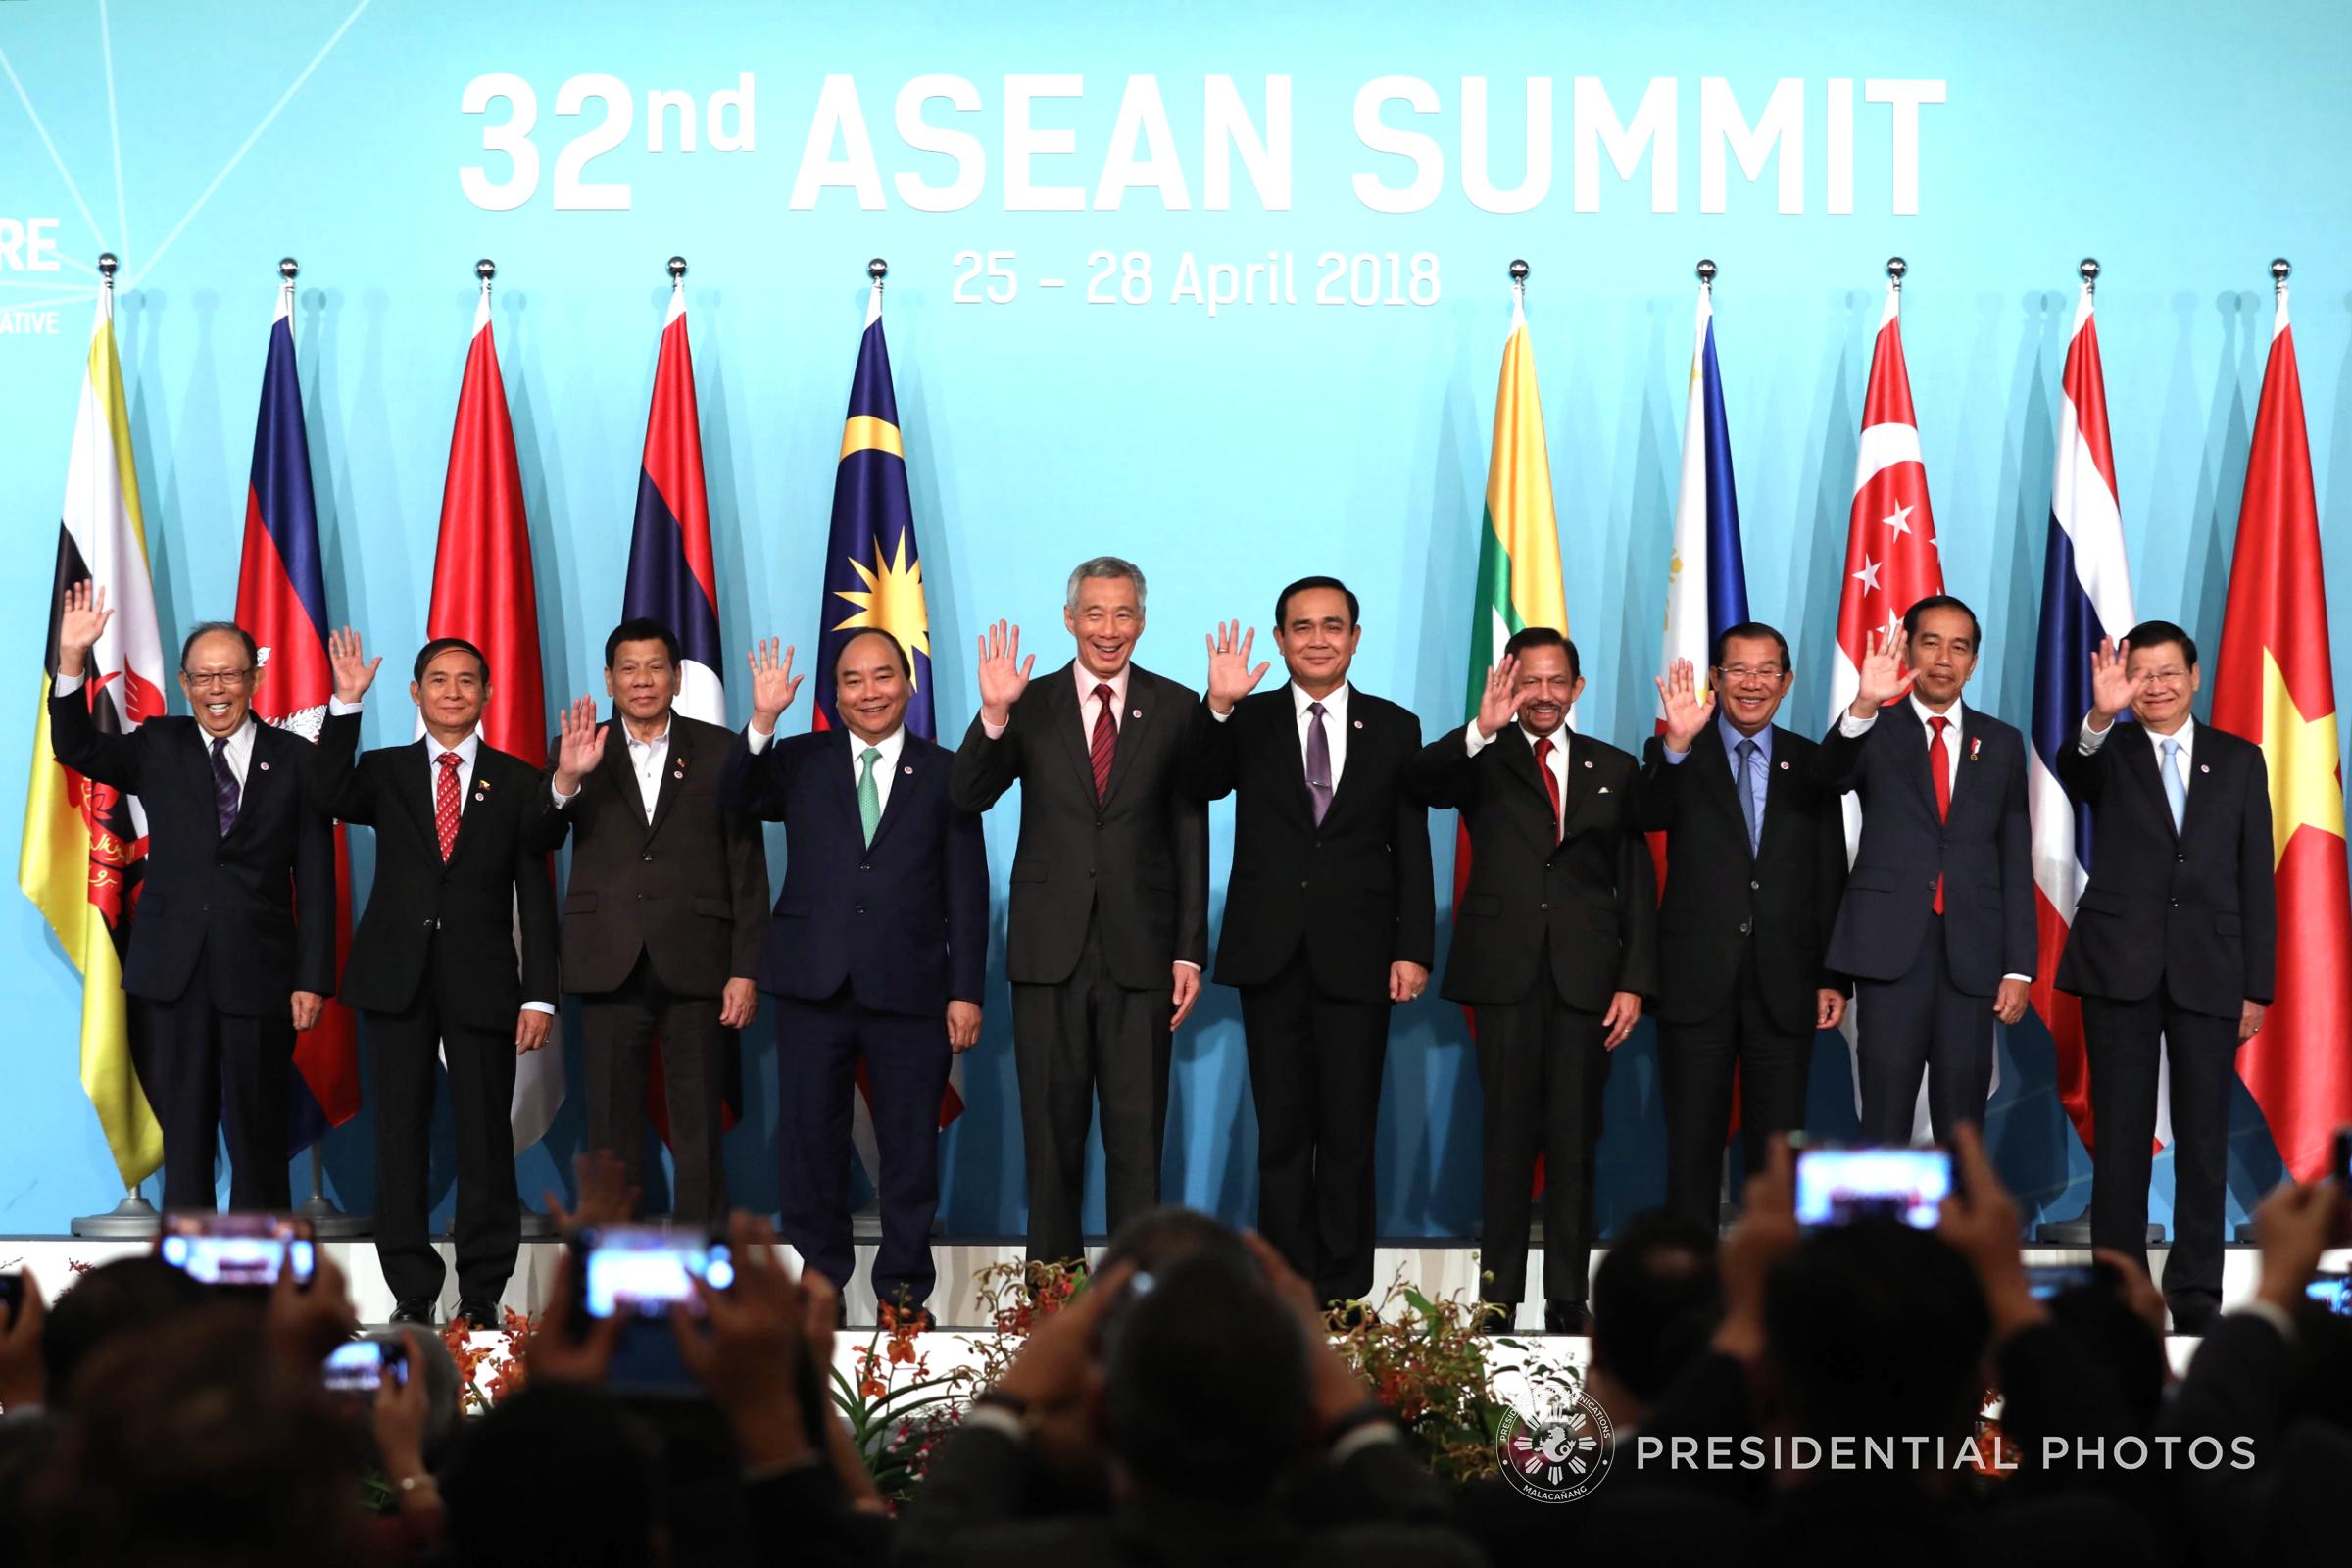 DUTERTE AND ASEAN. President Rodrigo Duterte and other leaders of ASEAN member countries pose for a photo during the opening ceremony of the 32nd ASEAN Summit at the Shangri-la Hotel on April 28, 2018. Malacañang file photo 